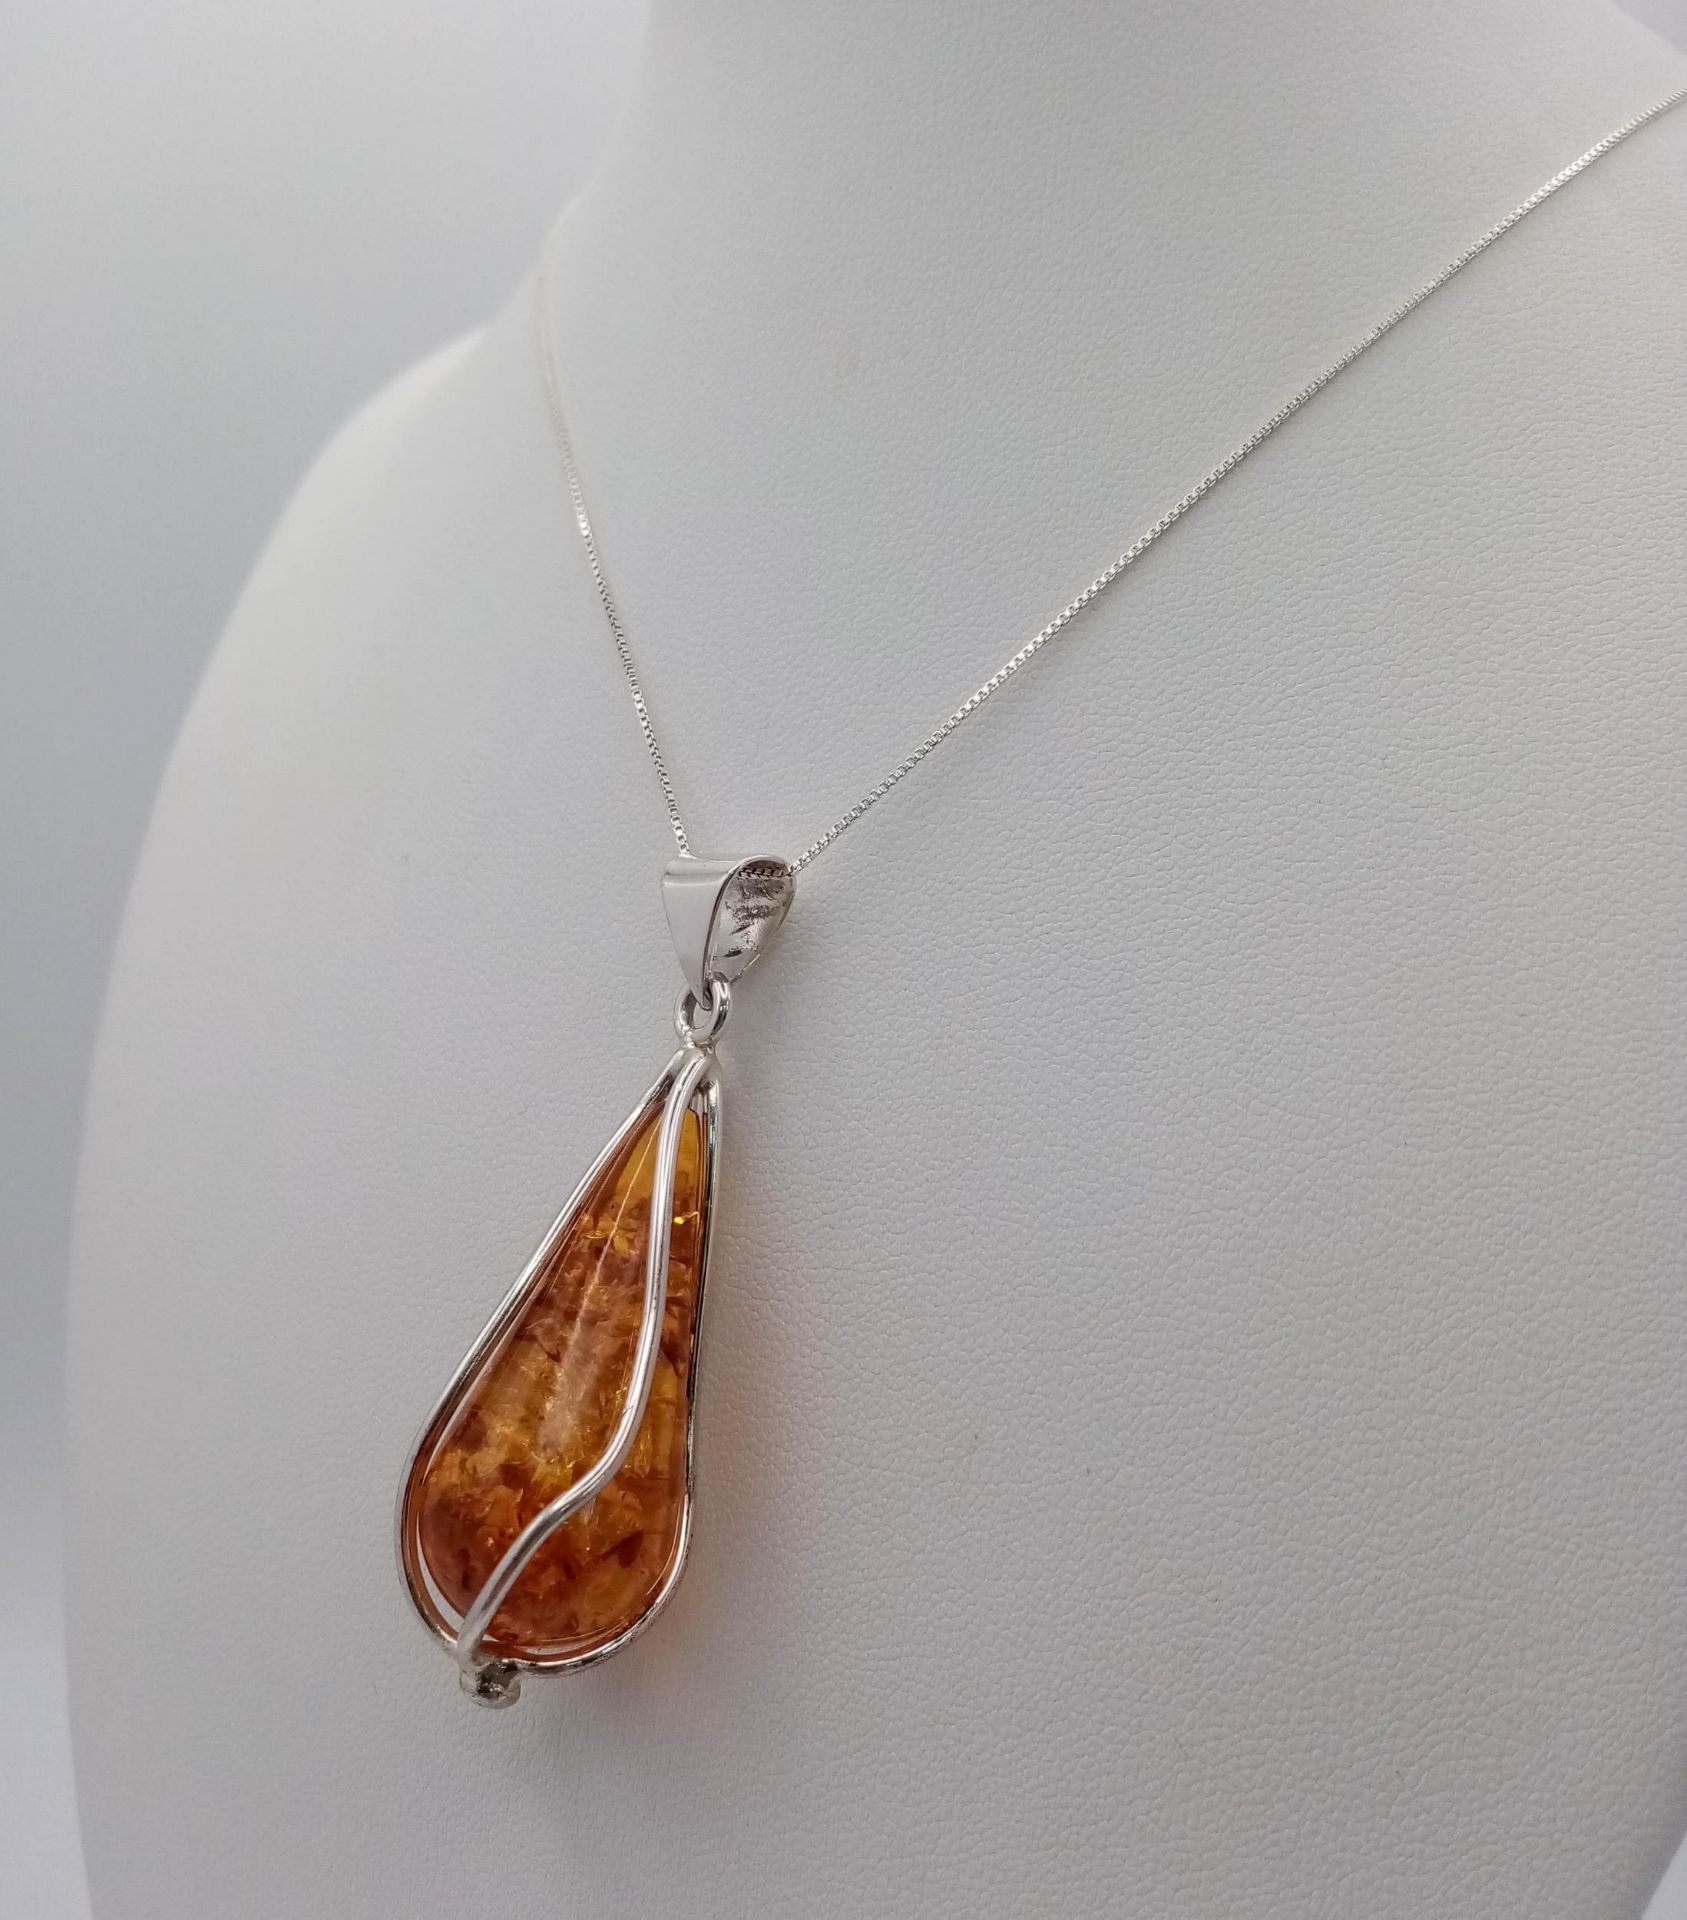 An Unworn, Fully Certified Limited Edition (1 of 50), Sterling Silver and Baltic Cognac Amber - Bild 3 aus 5